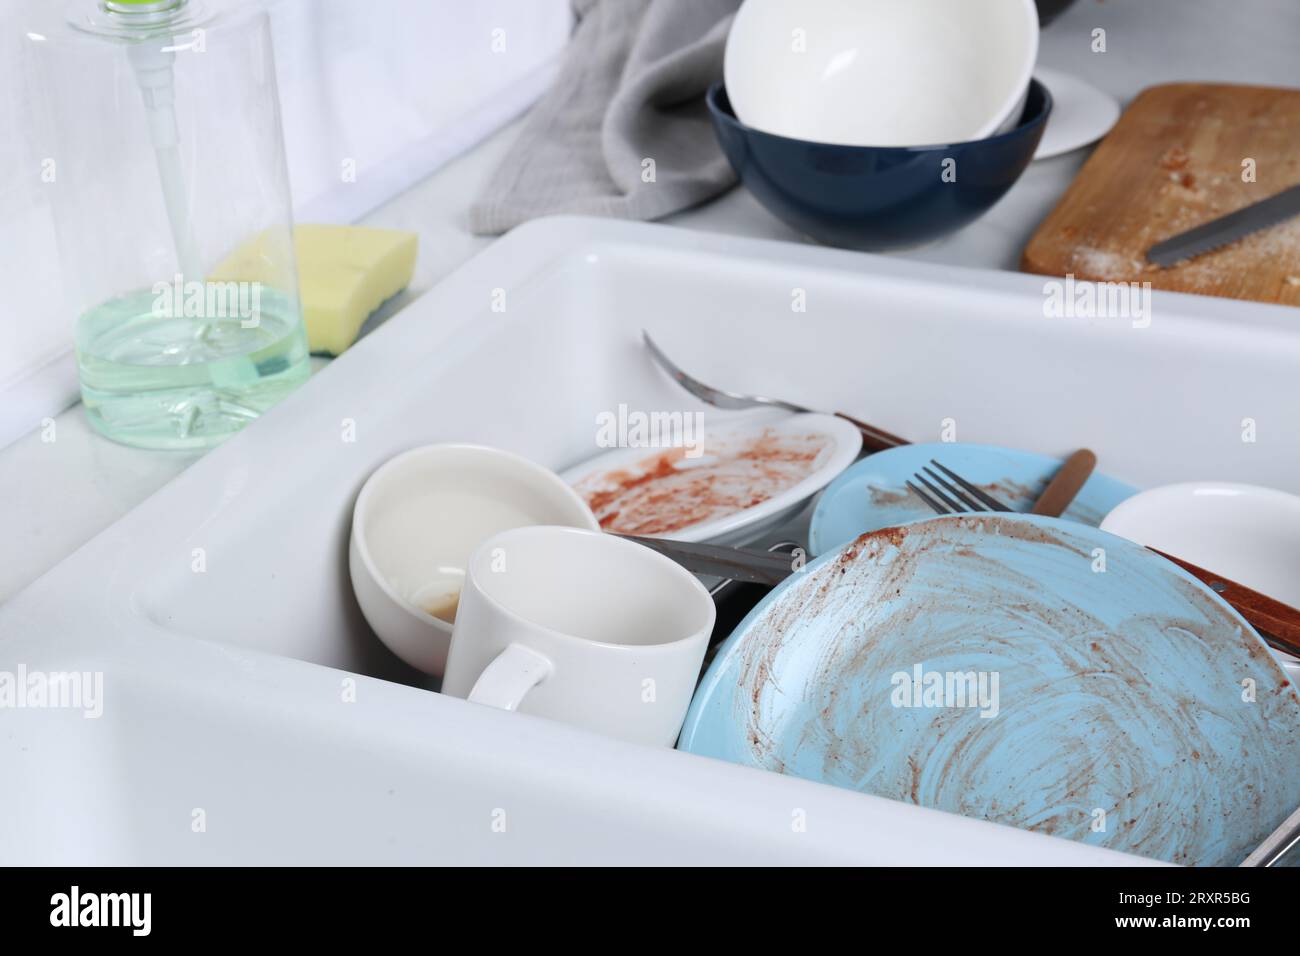 Sink with many dirty utensils and dishware in messy kitchen Stock Photo